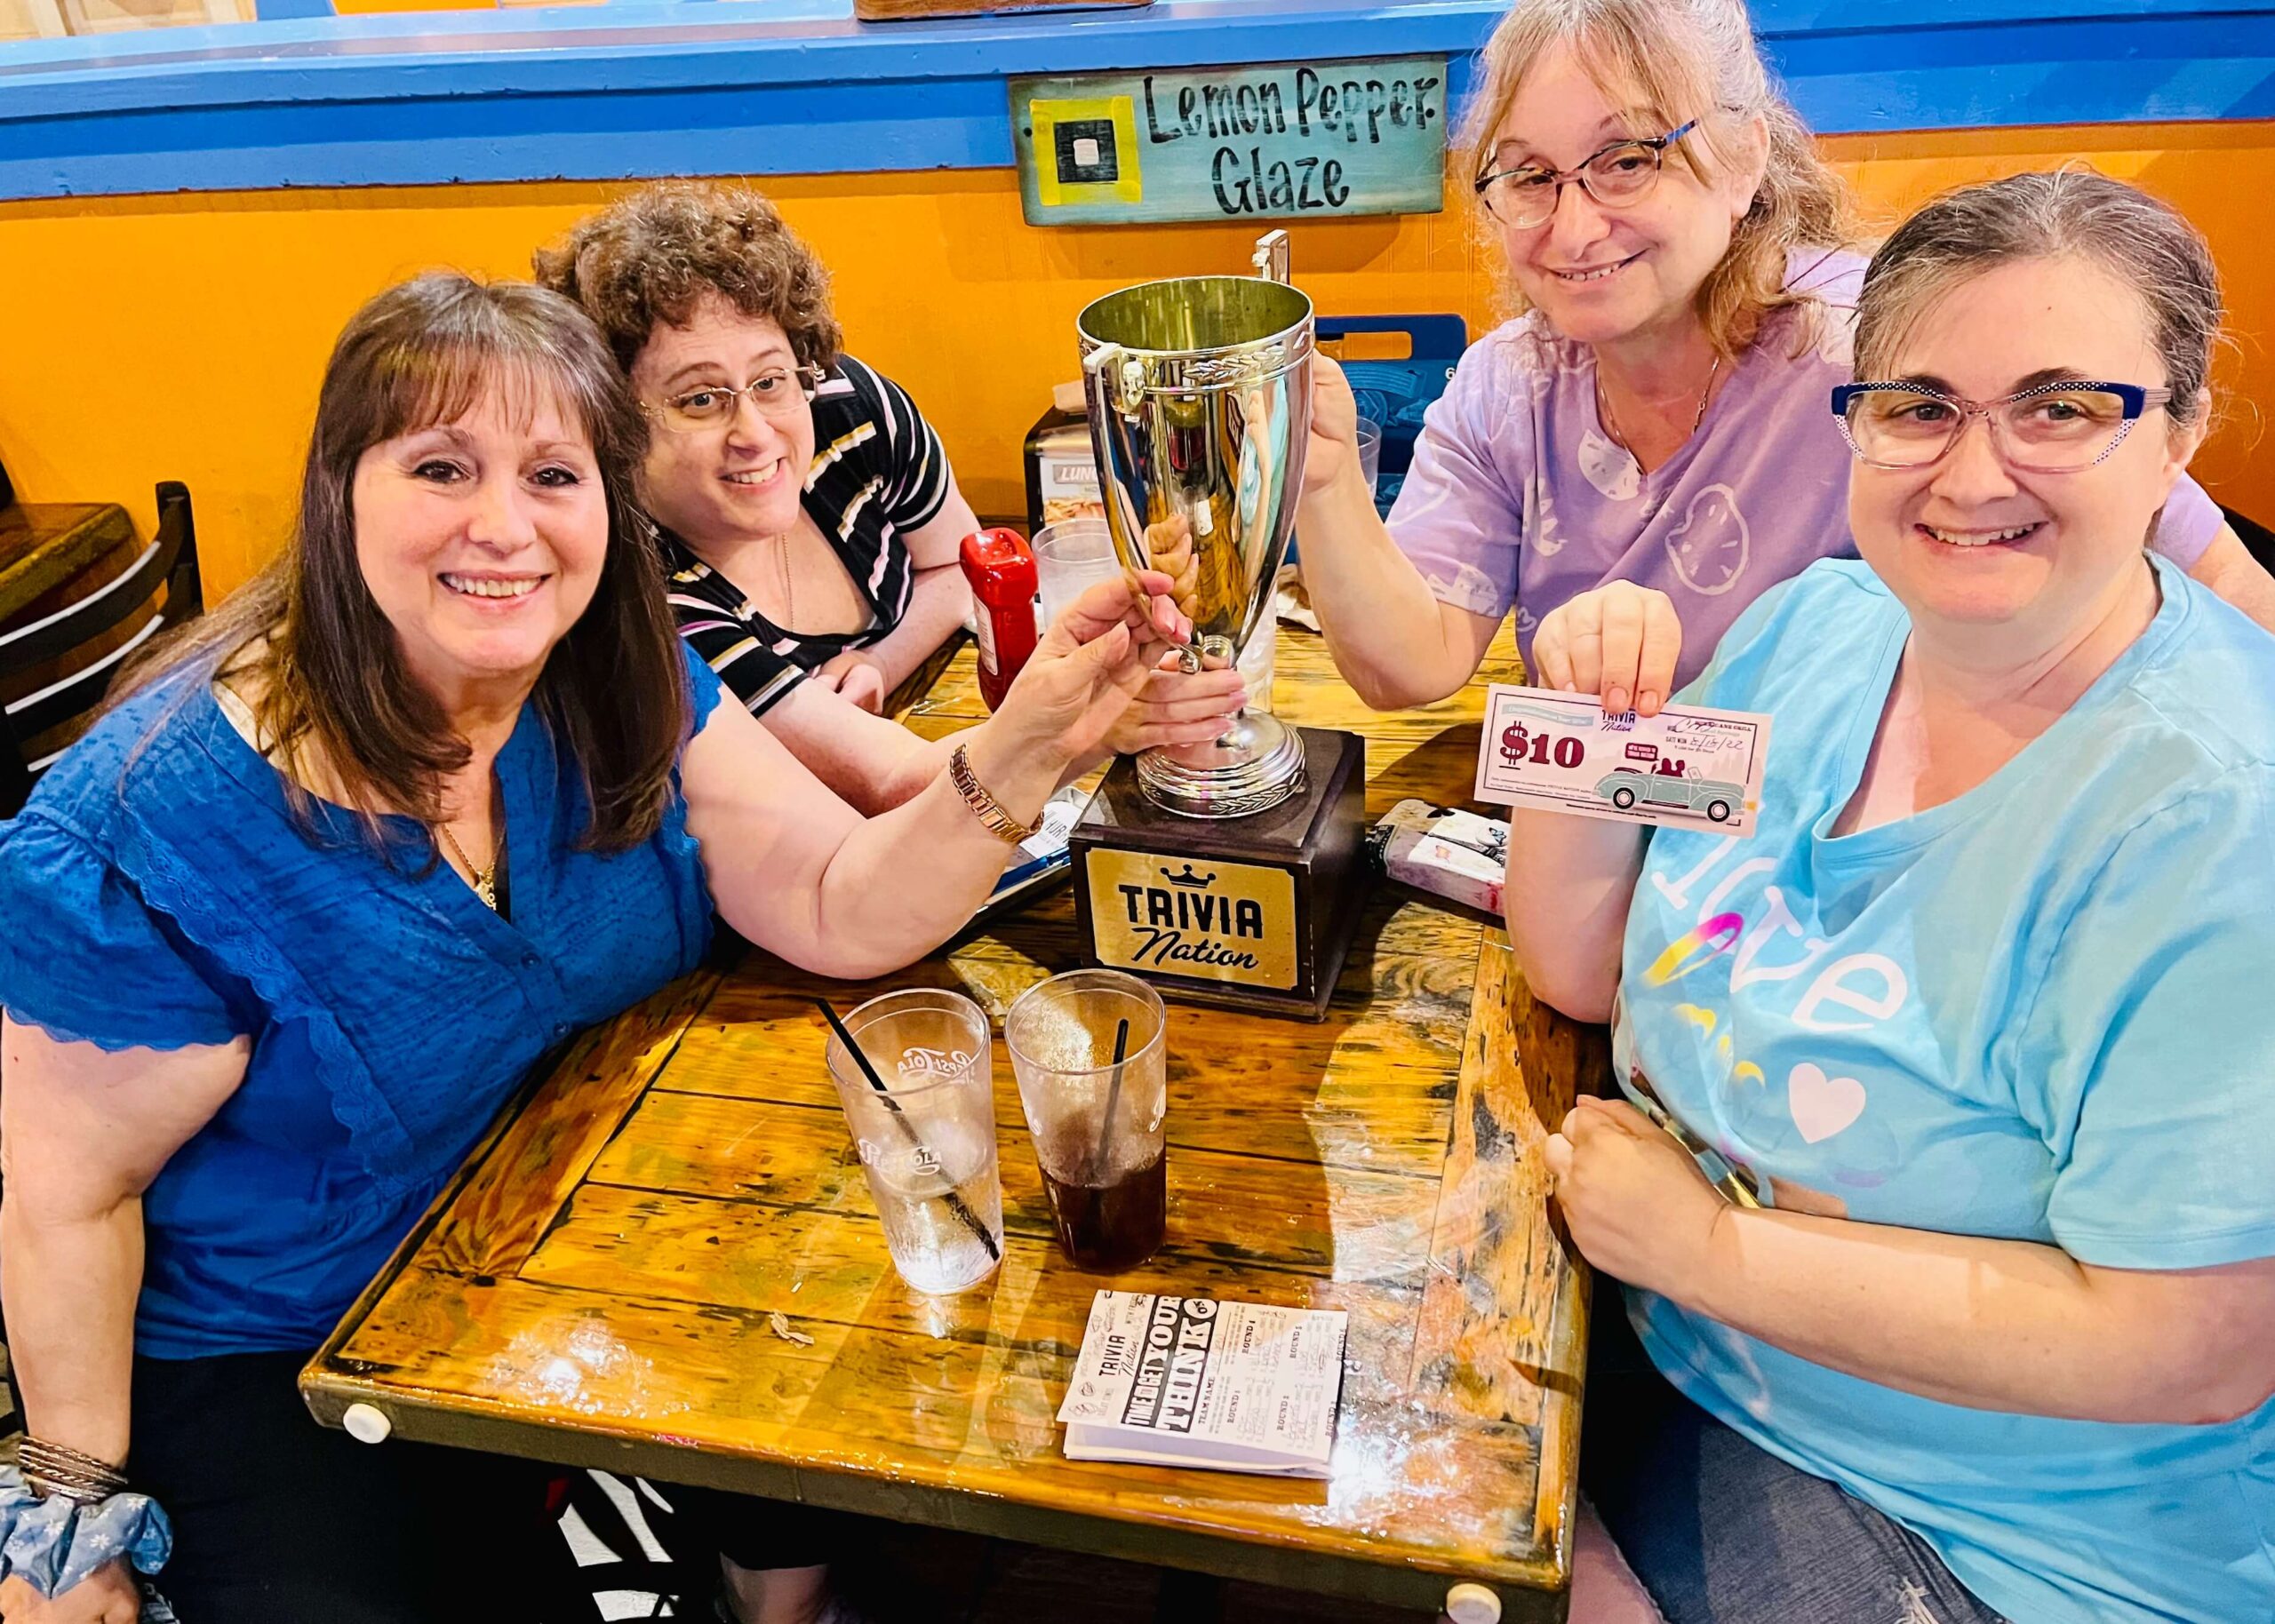 Hurricane Grill & Wings Coral Springs FL 33076 trivia night: group of four ladies seated around a table all smiling with a Trivia Nation trophy in between me and the woman in front holding up a $10 trivia coupon